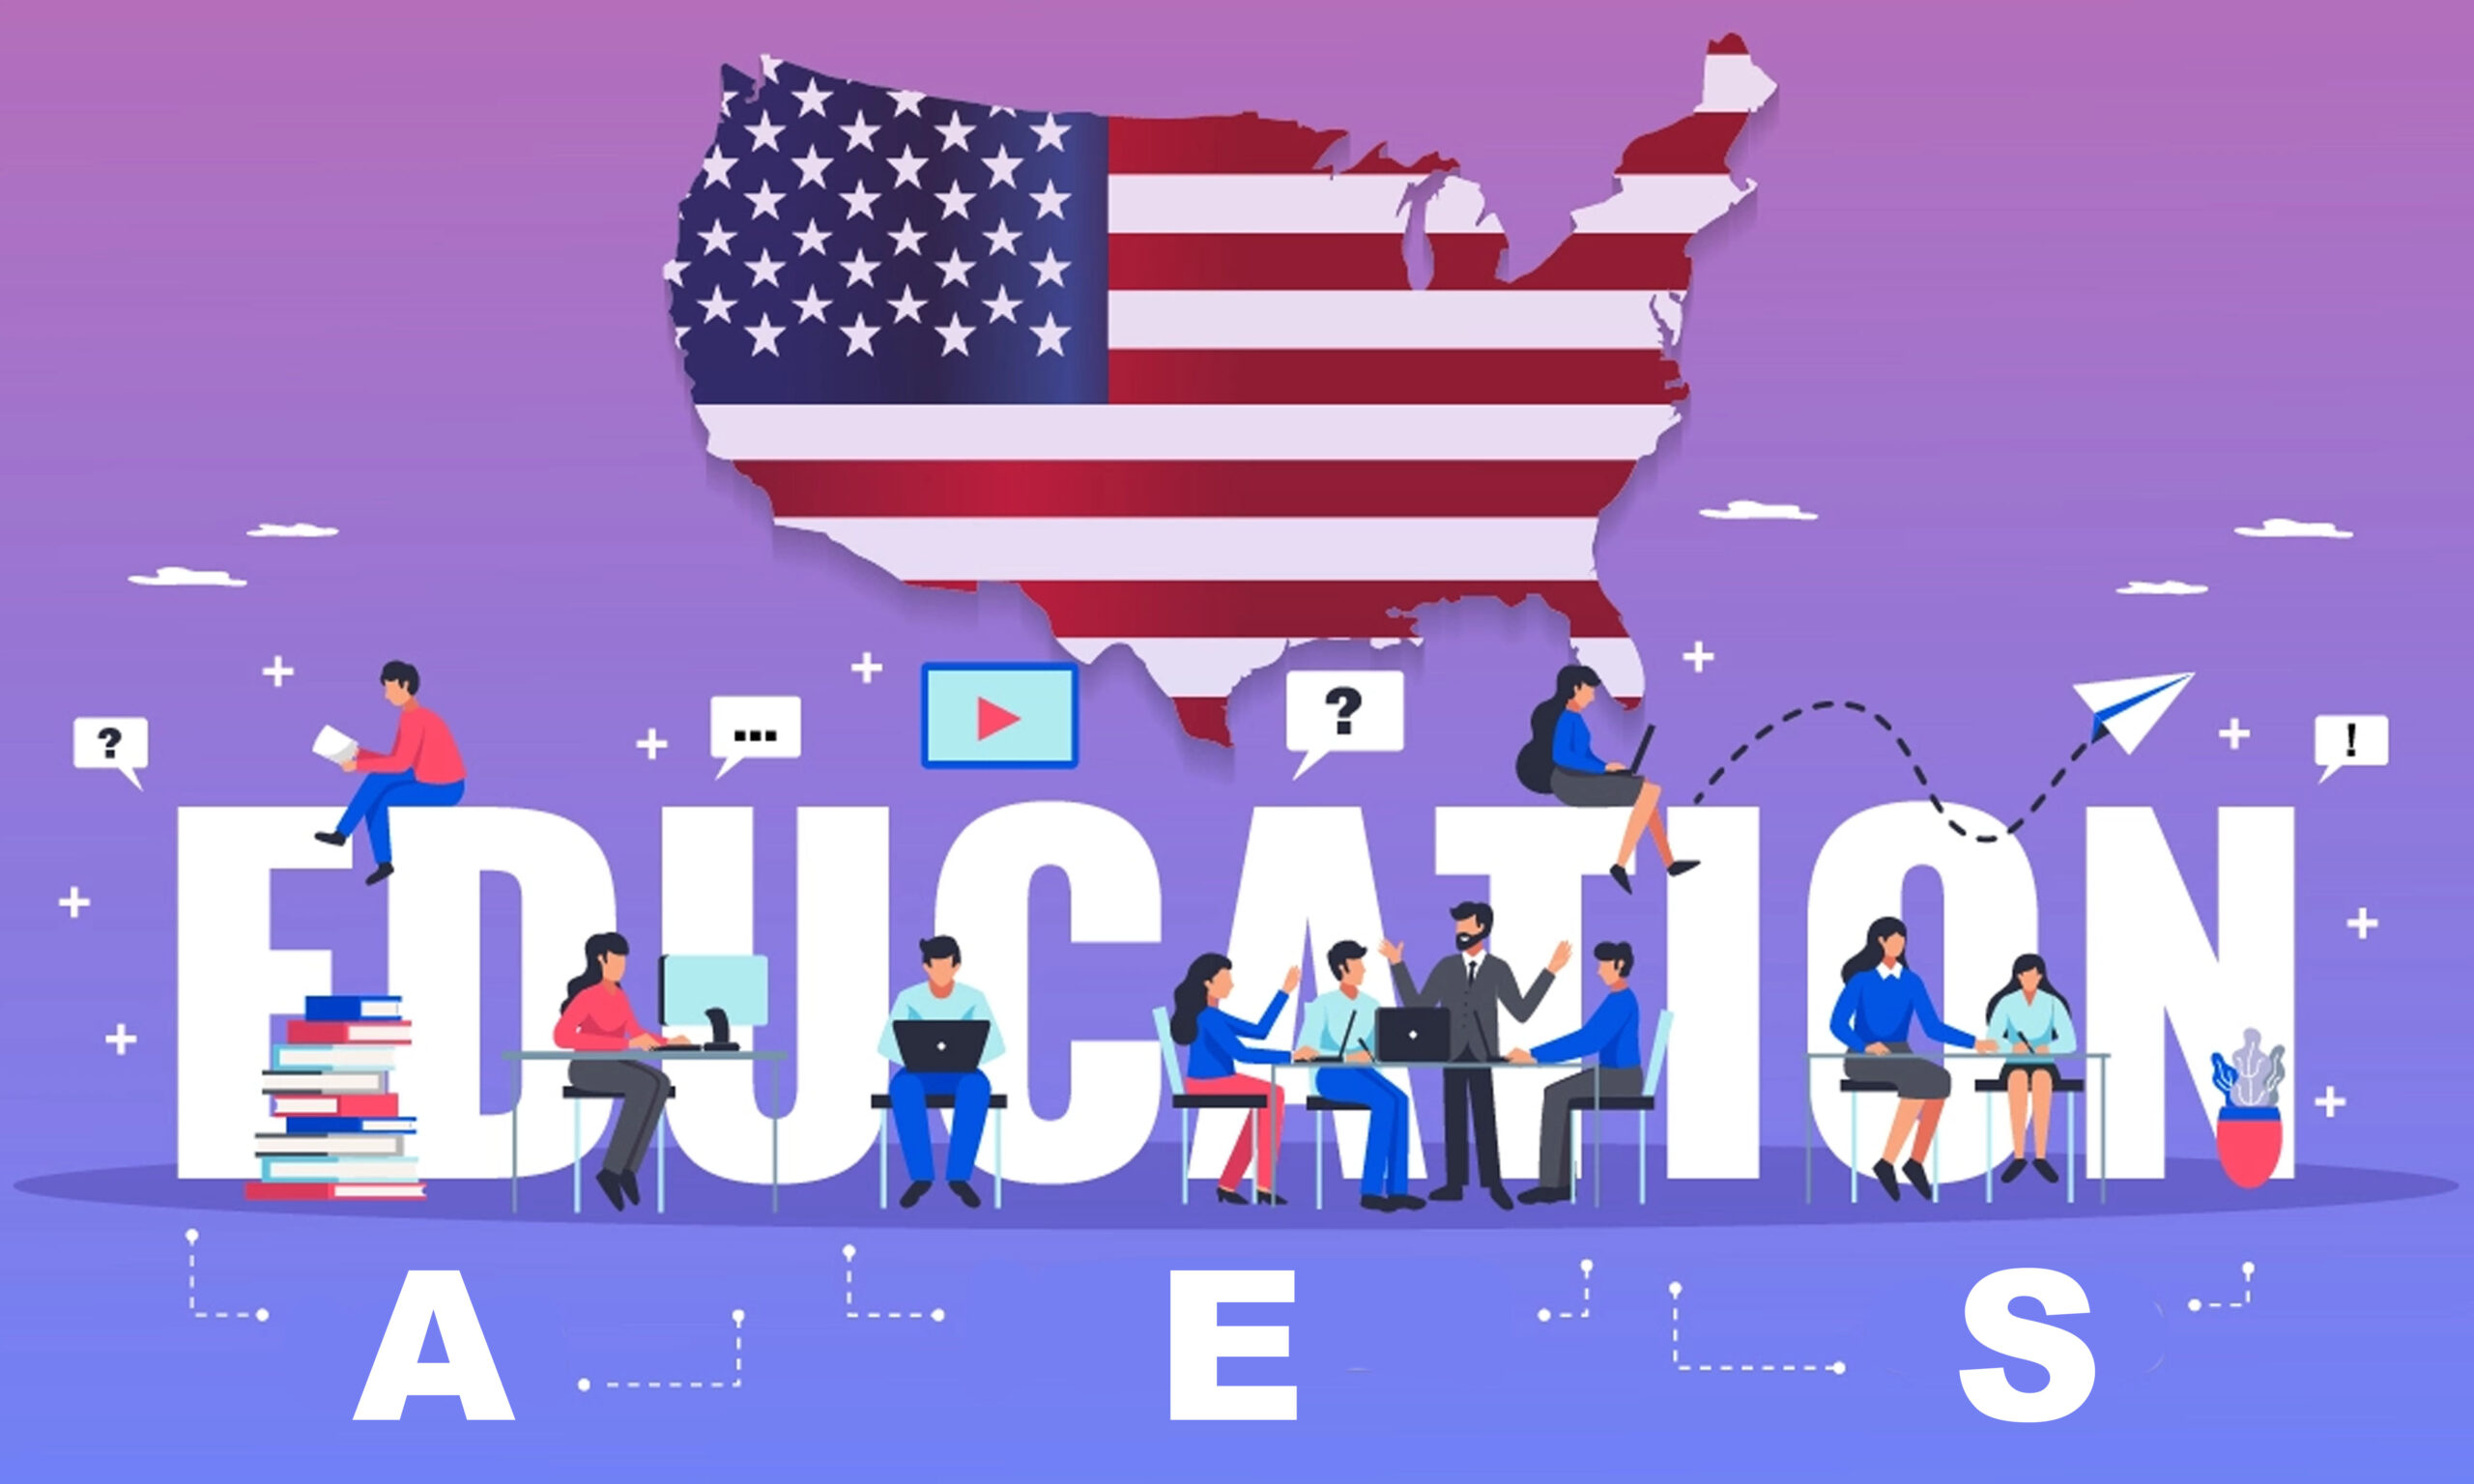 American Education Services